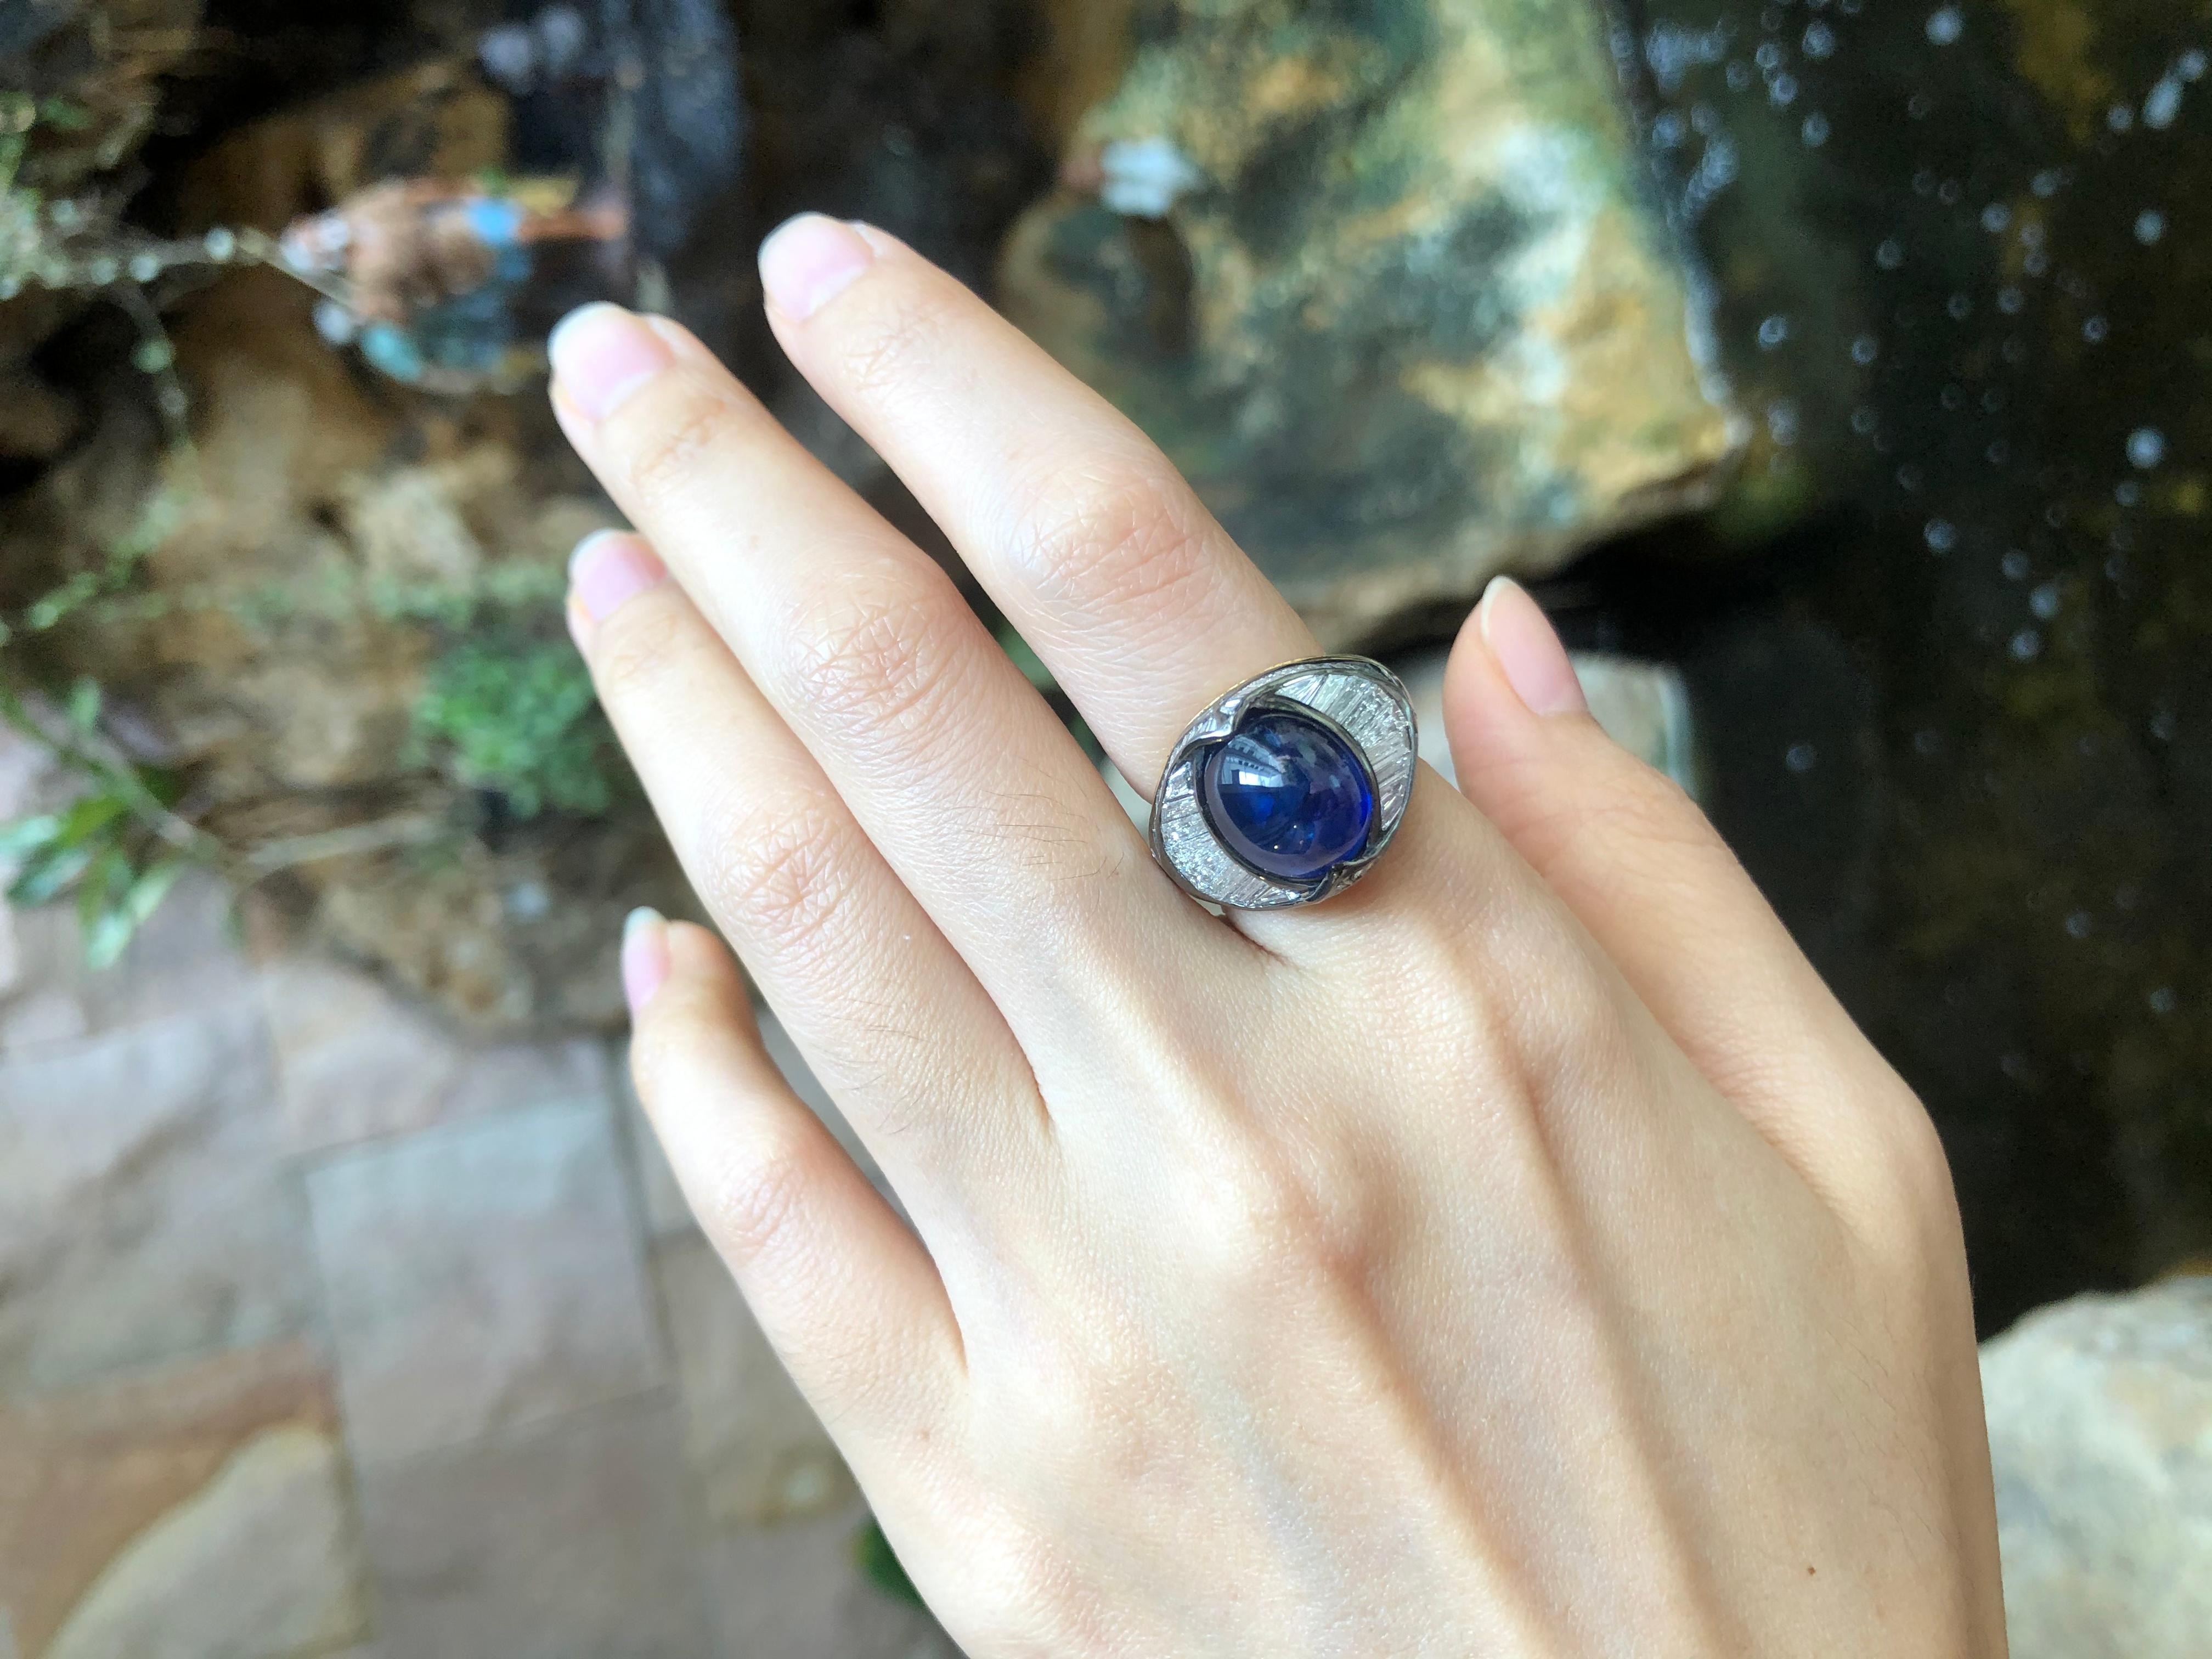 Cabochon Blue Sapphire 8.80 carats with Diamond 3.23 carats Ring set in 18 Karat Gold Settings

Width:  0.9 cm 
Length: 1.4 cm
Ring Size: 50
Total Weight: 12.47 grams

